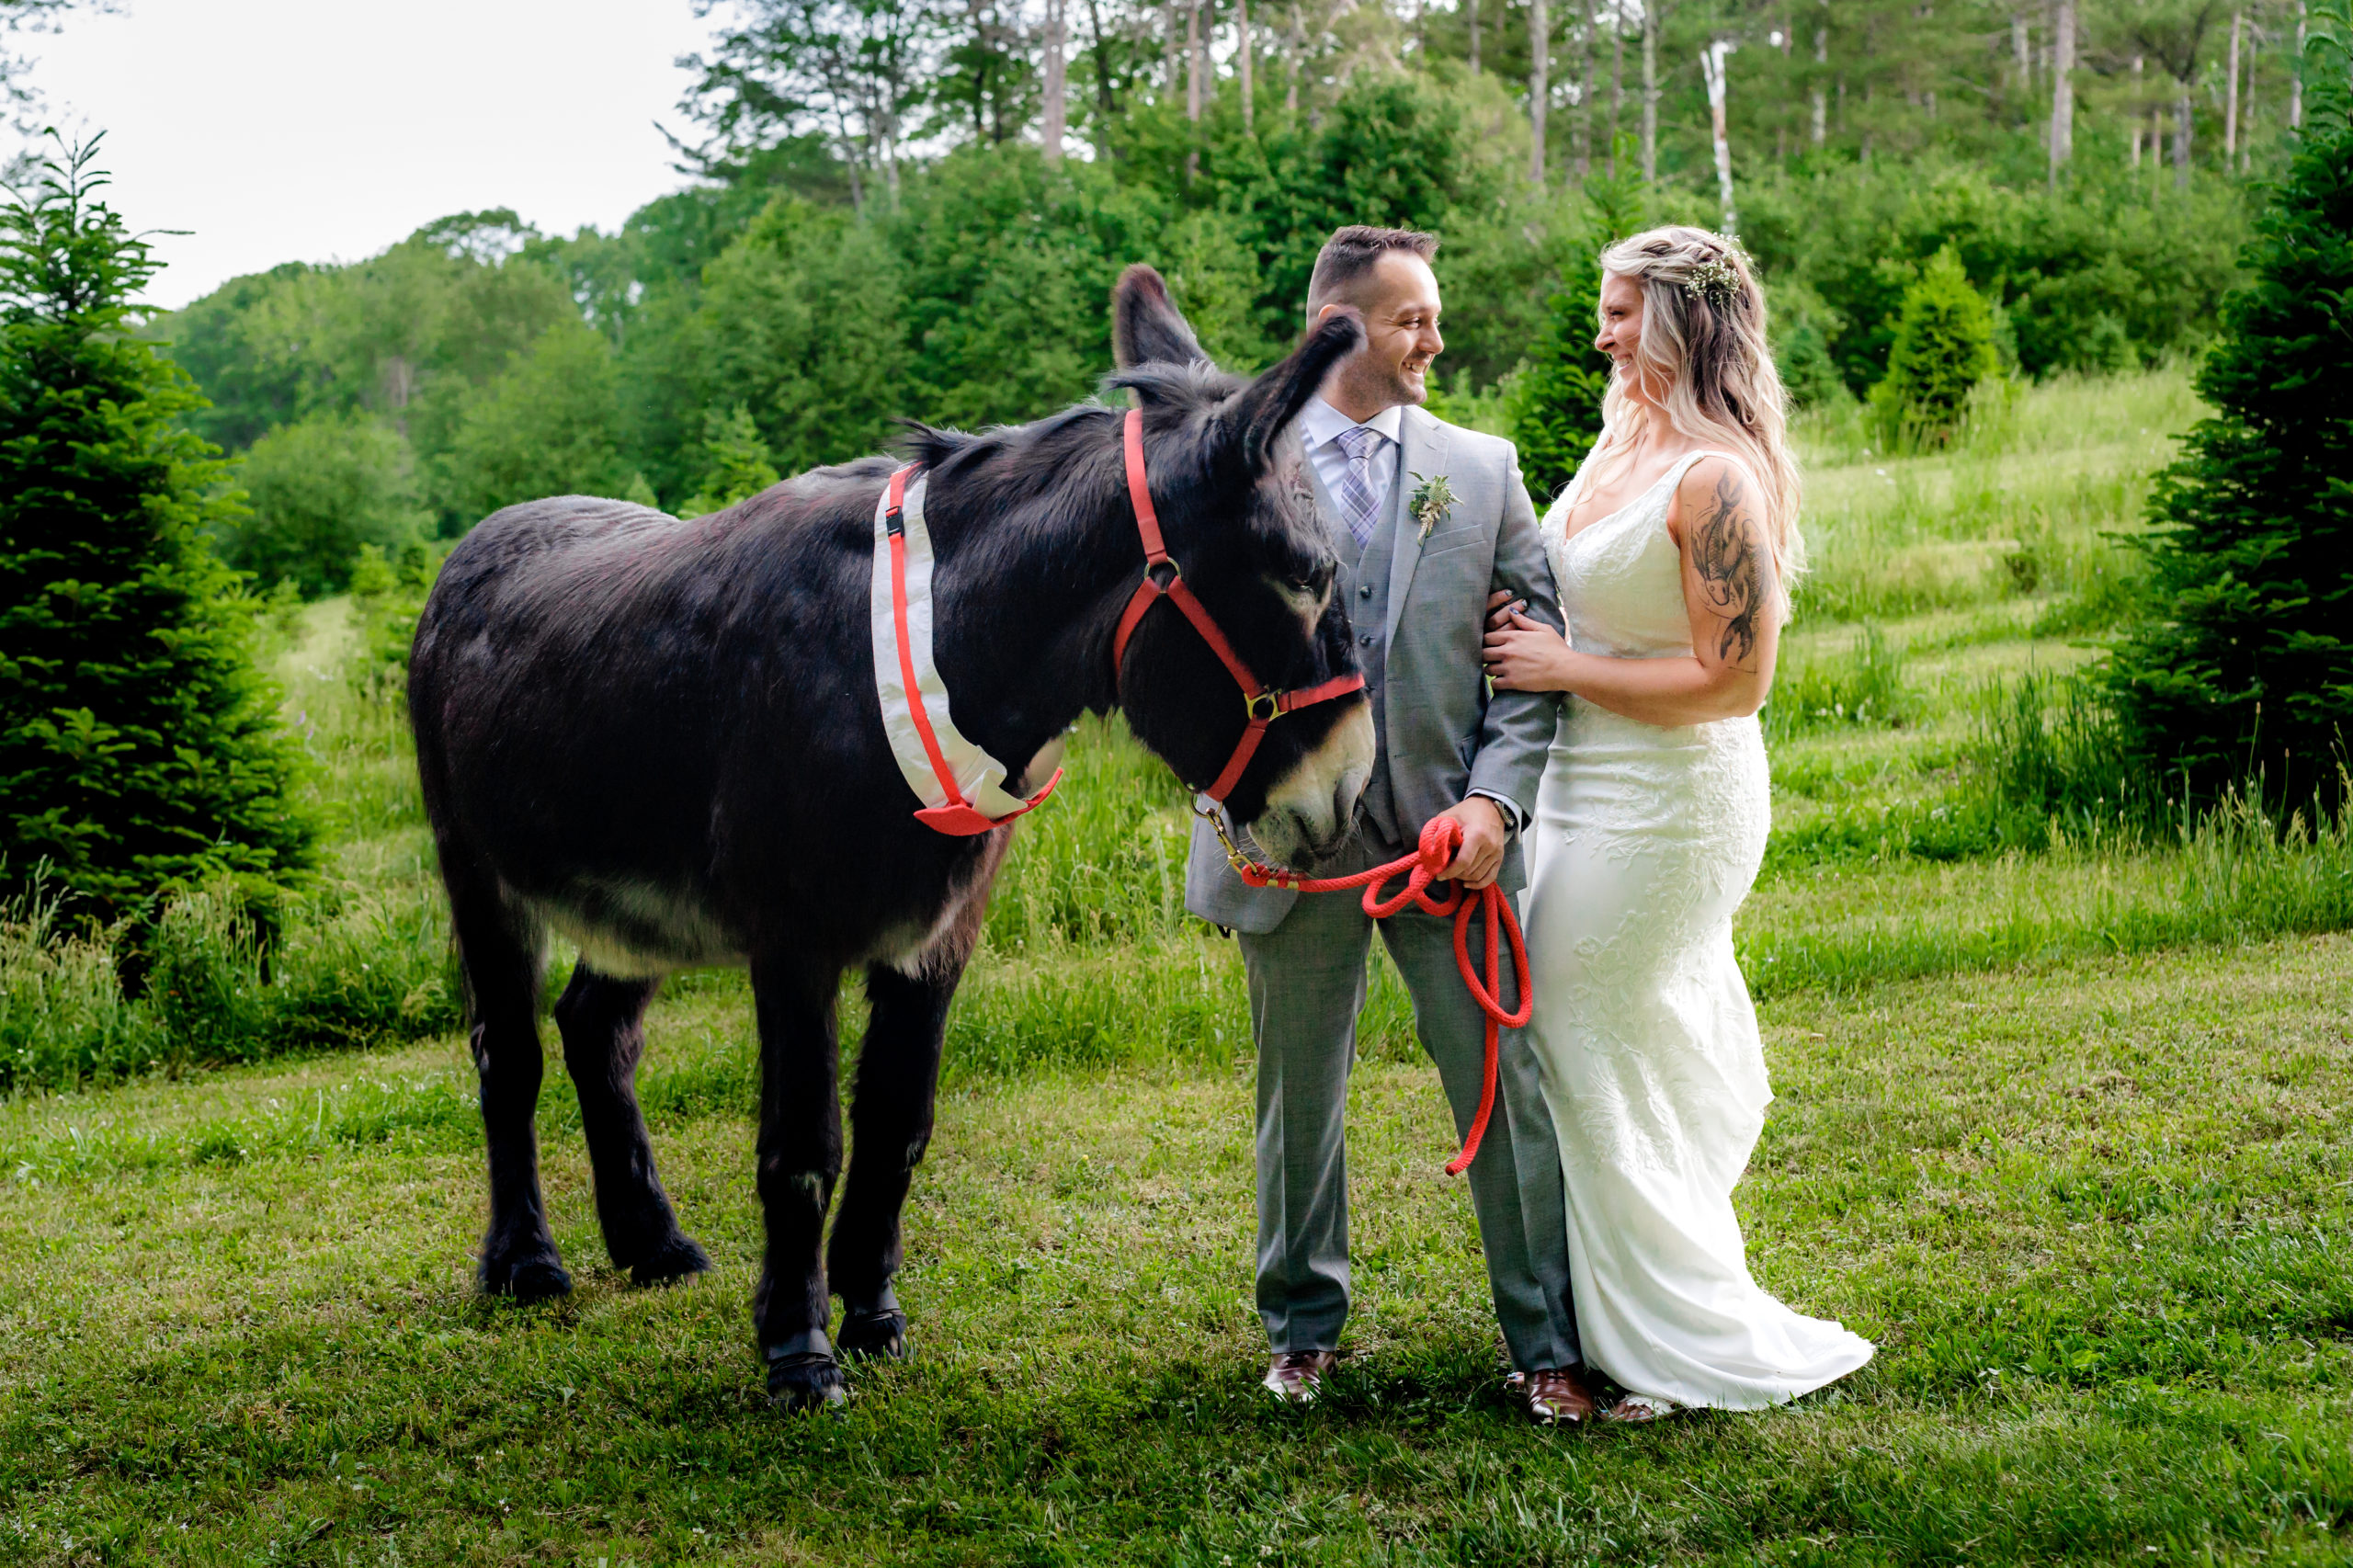 The newlyweds hang out with the local donkey at their Lebanon Maine elopement